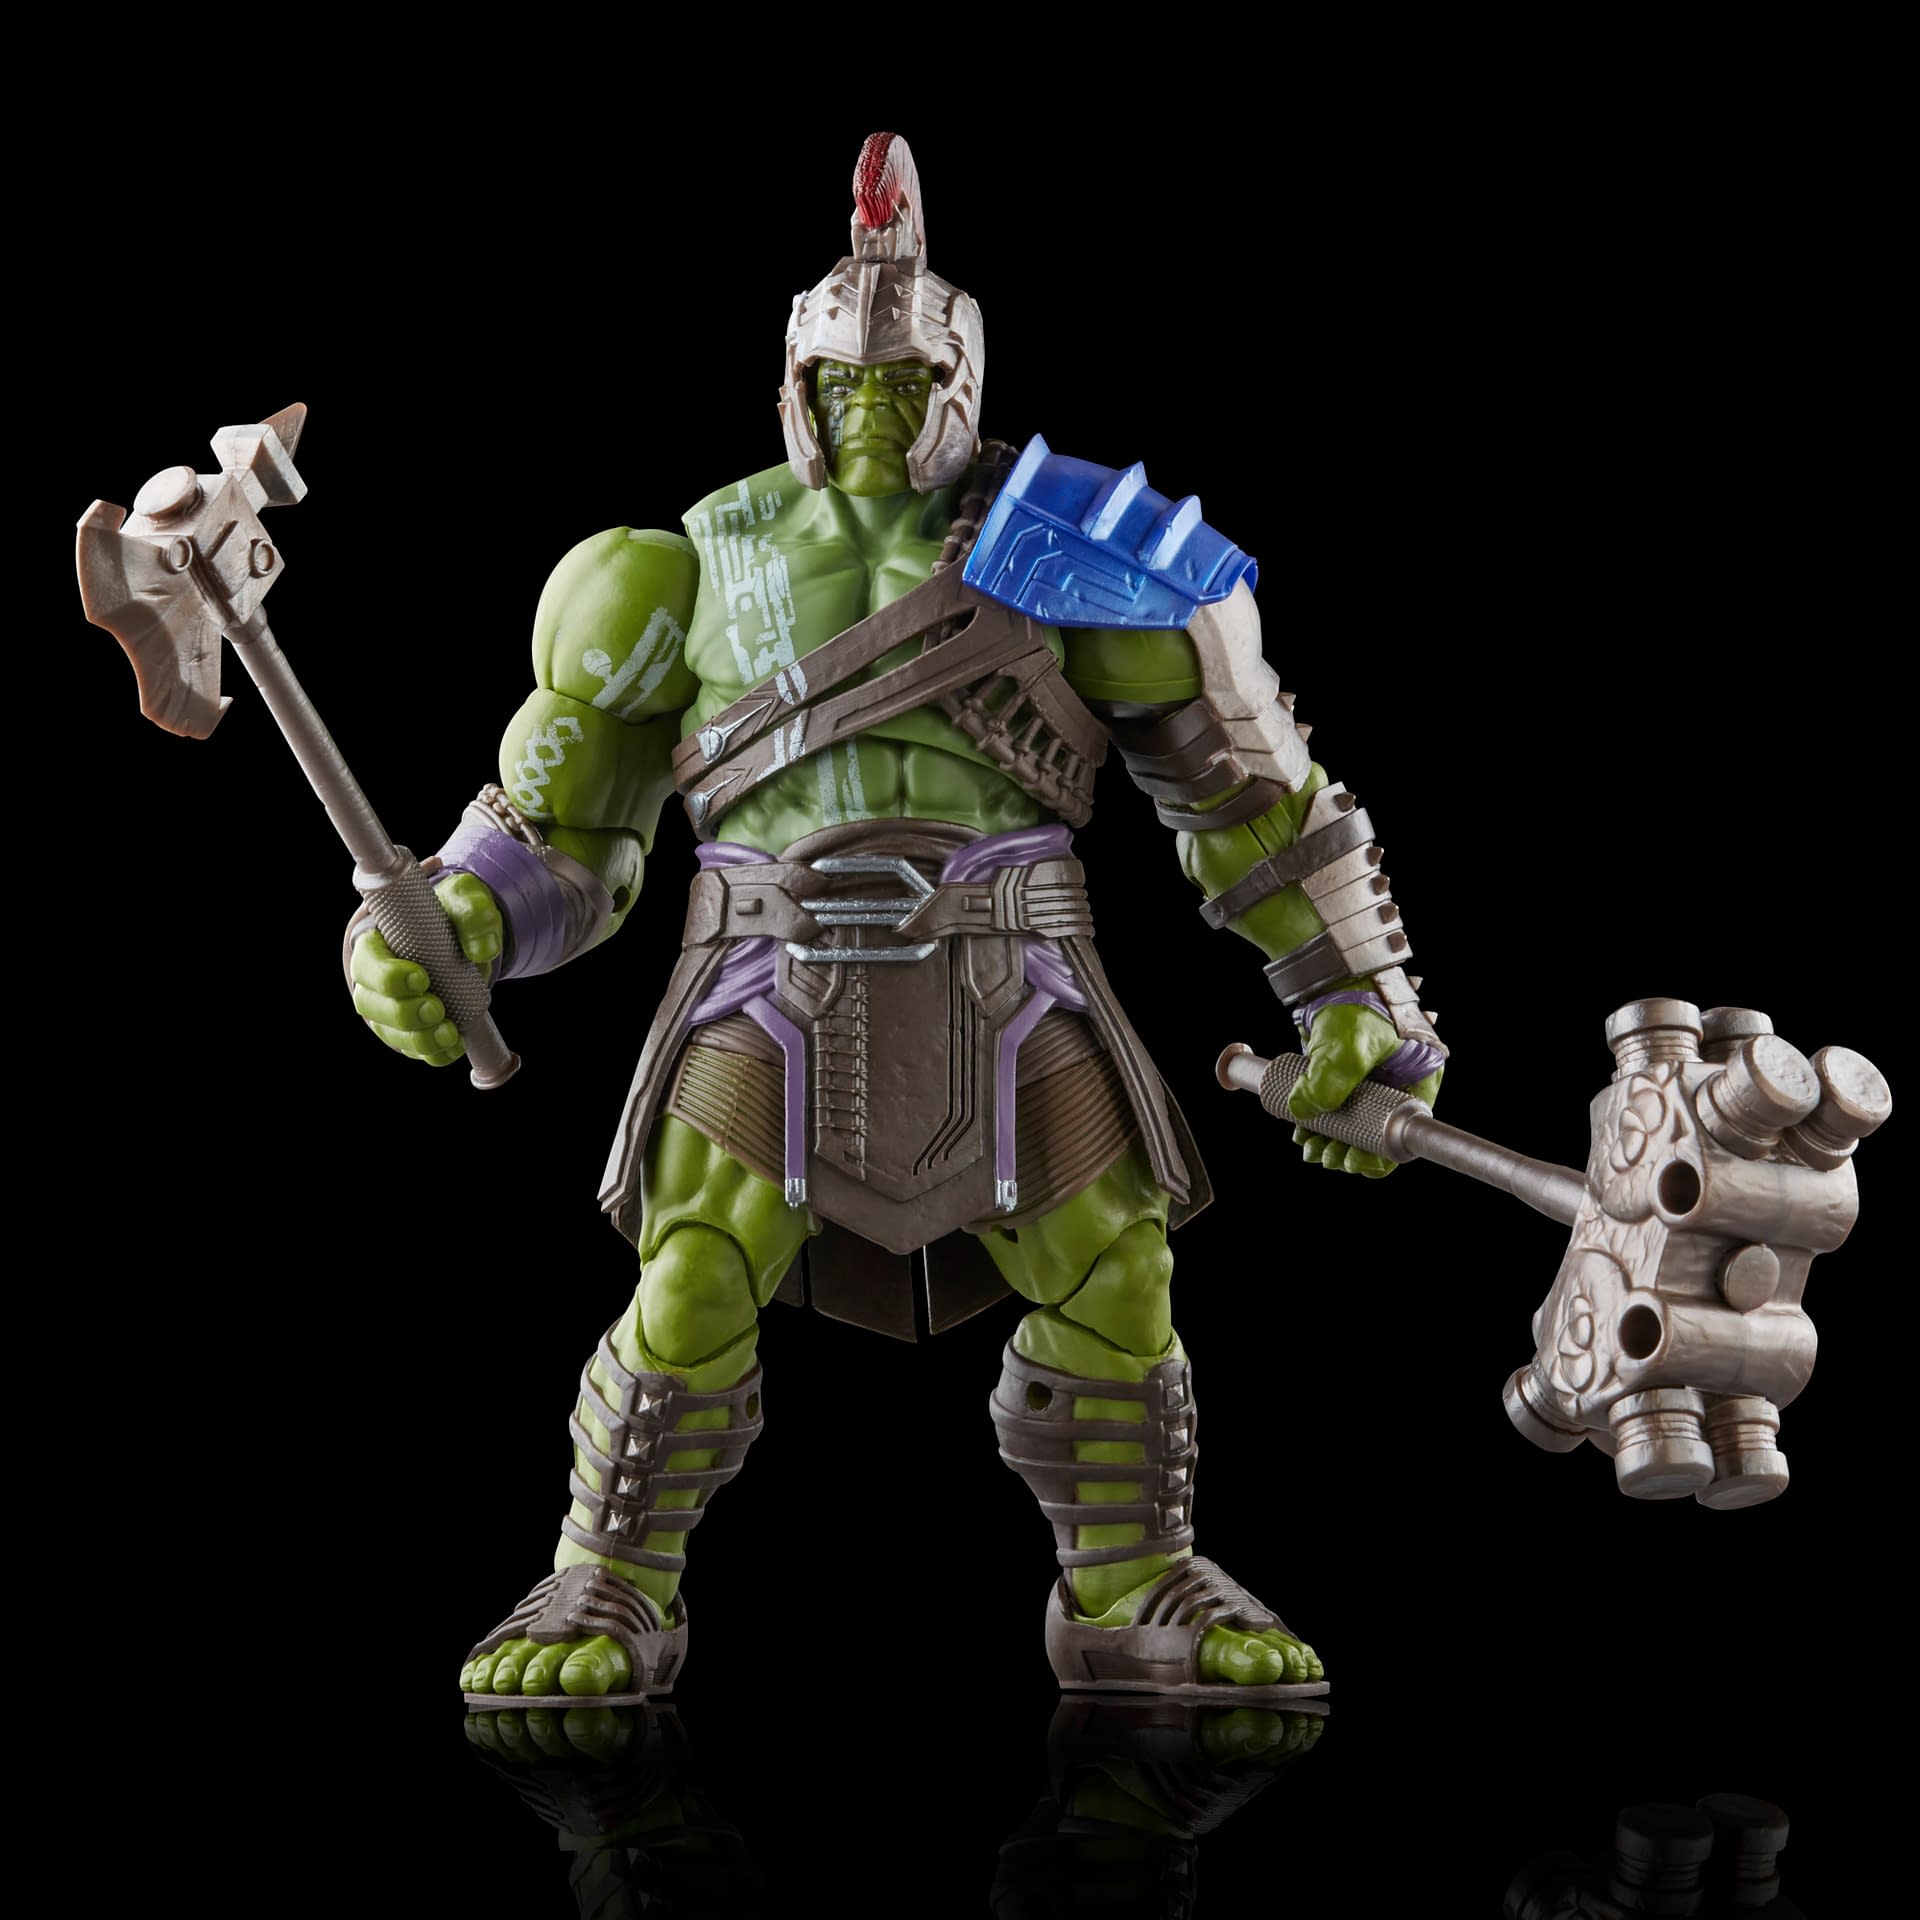 Gladiator Hulk Enters the Arena with Deluxe Marvel Legends Figure